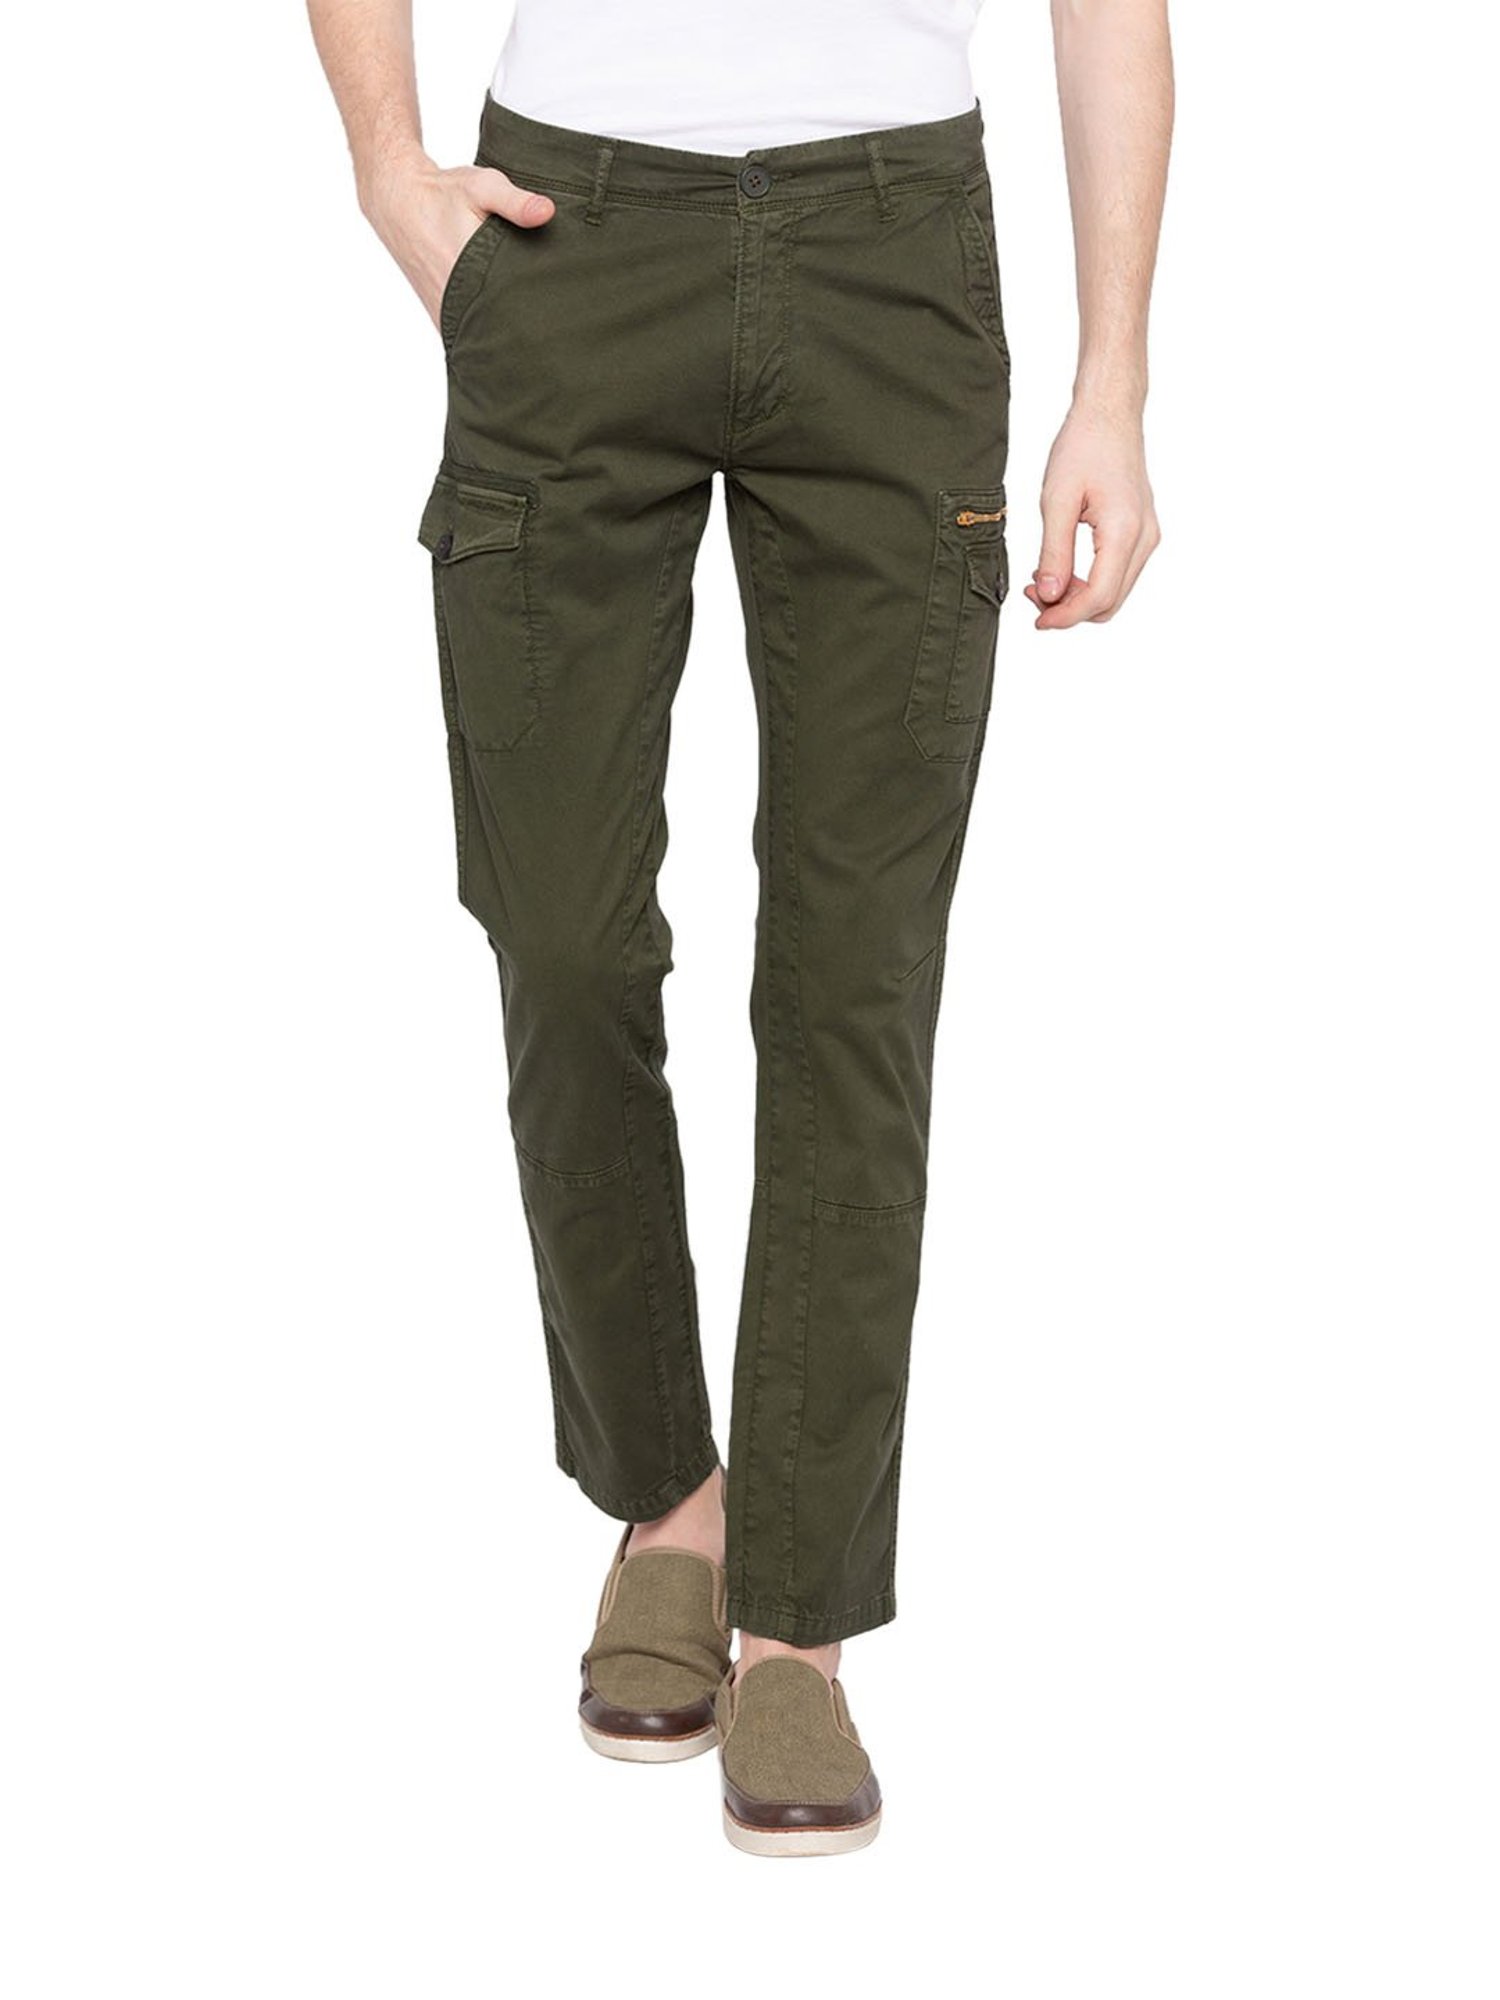 Buy Cargo Pants Olive Green  My NOMAD